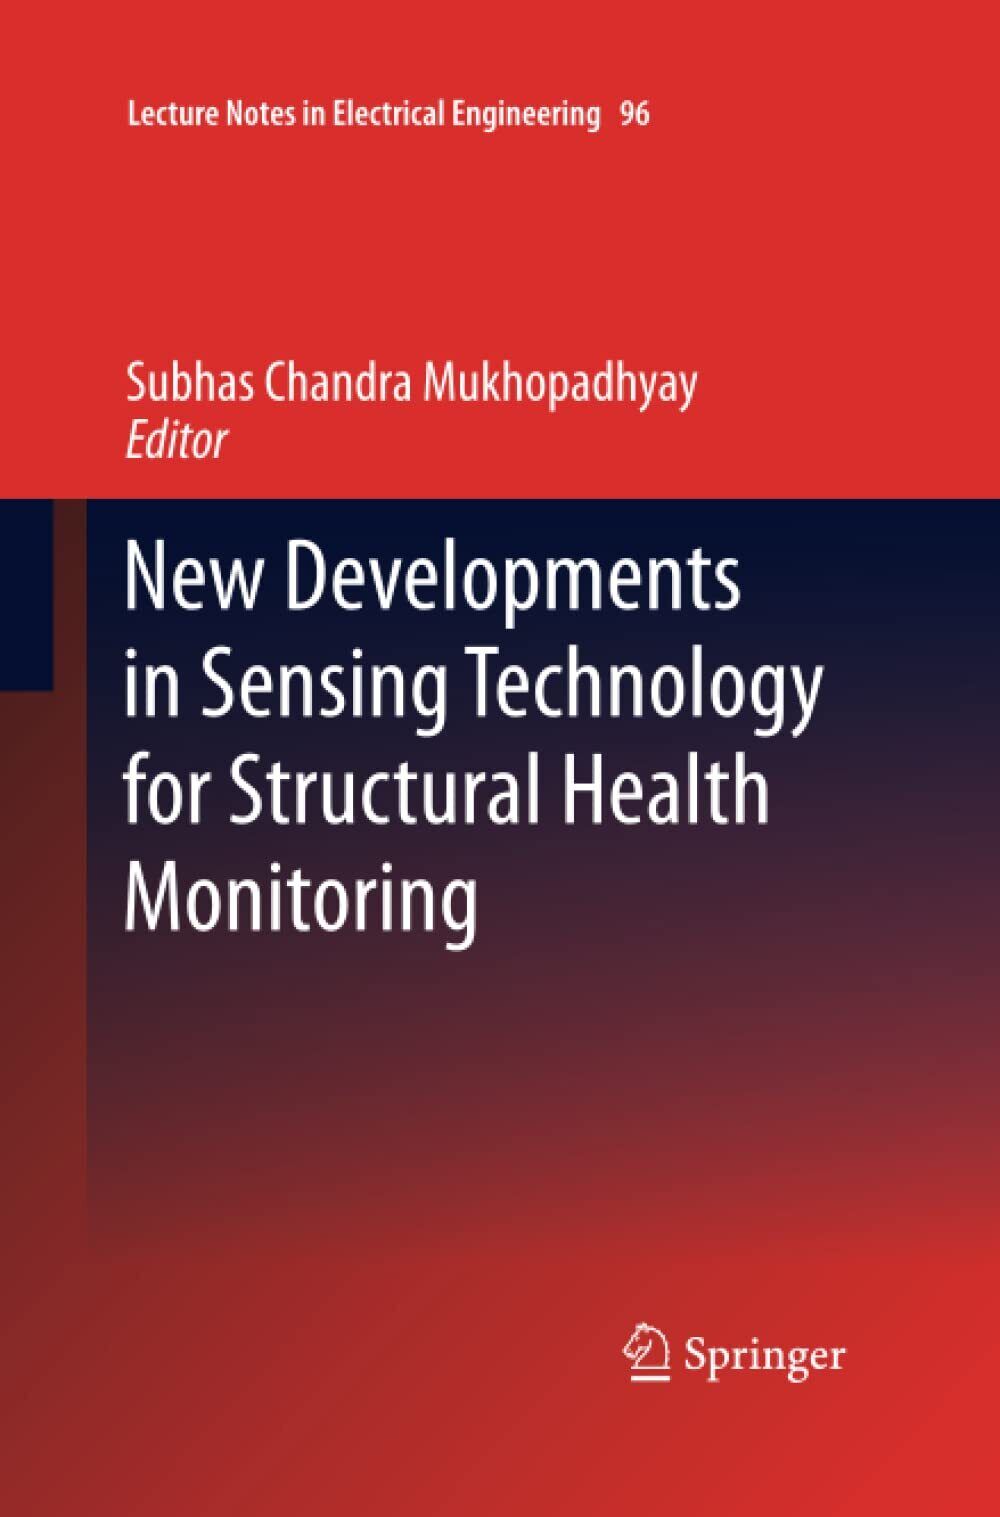 New Developments in Sensing Technology for Structural Health Monitoring - 2016 libro usato